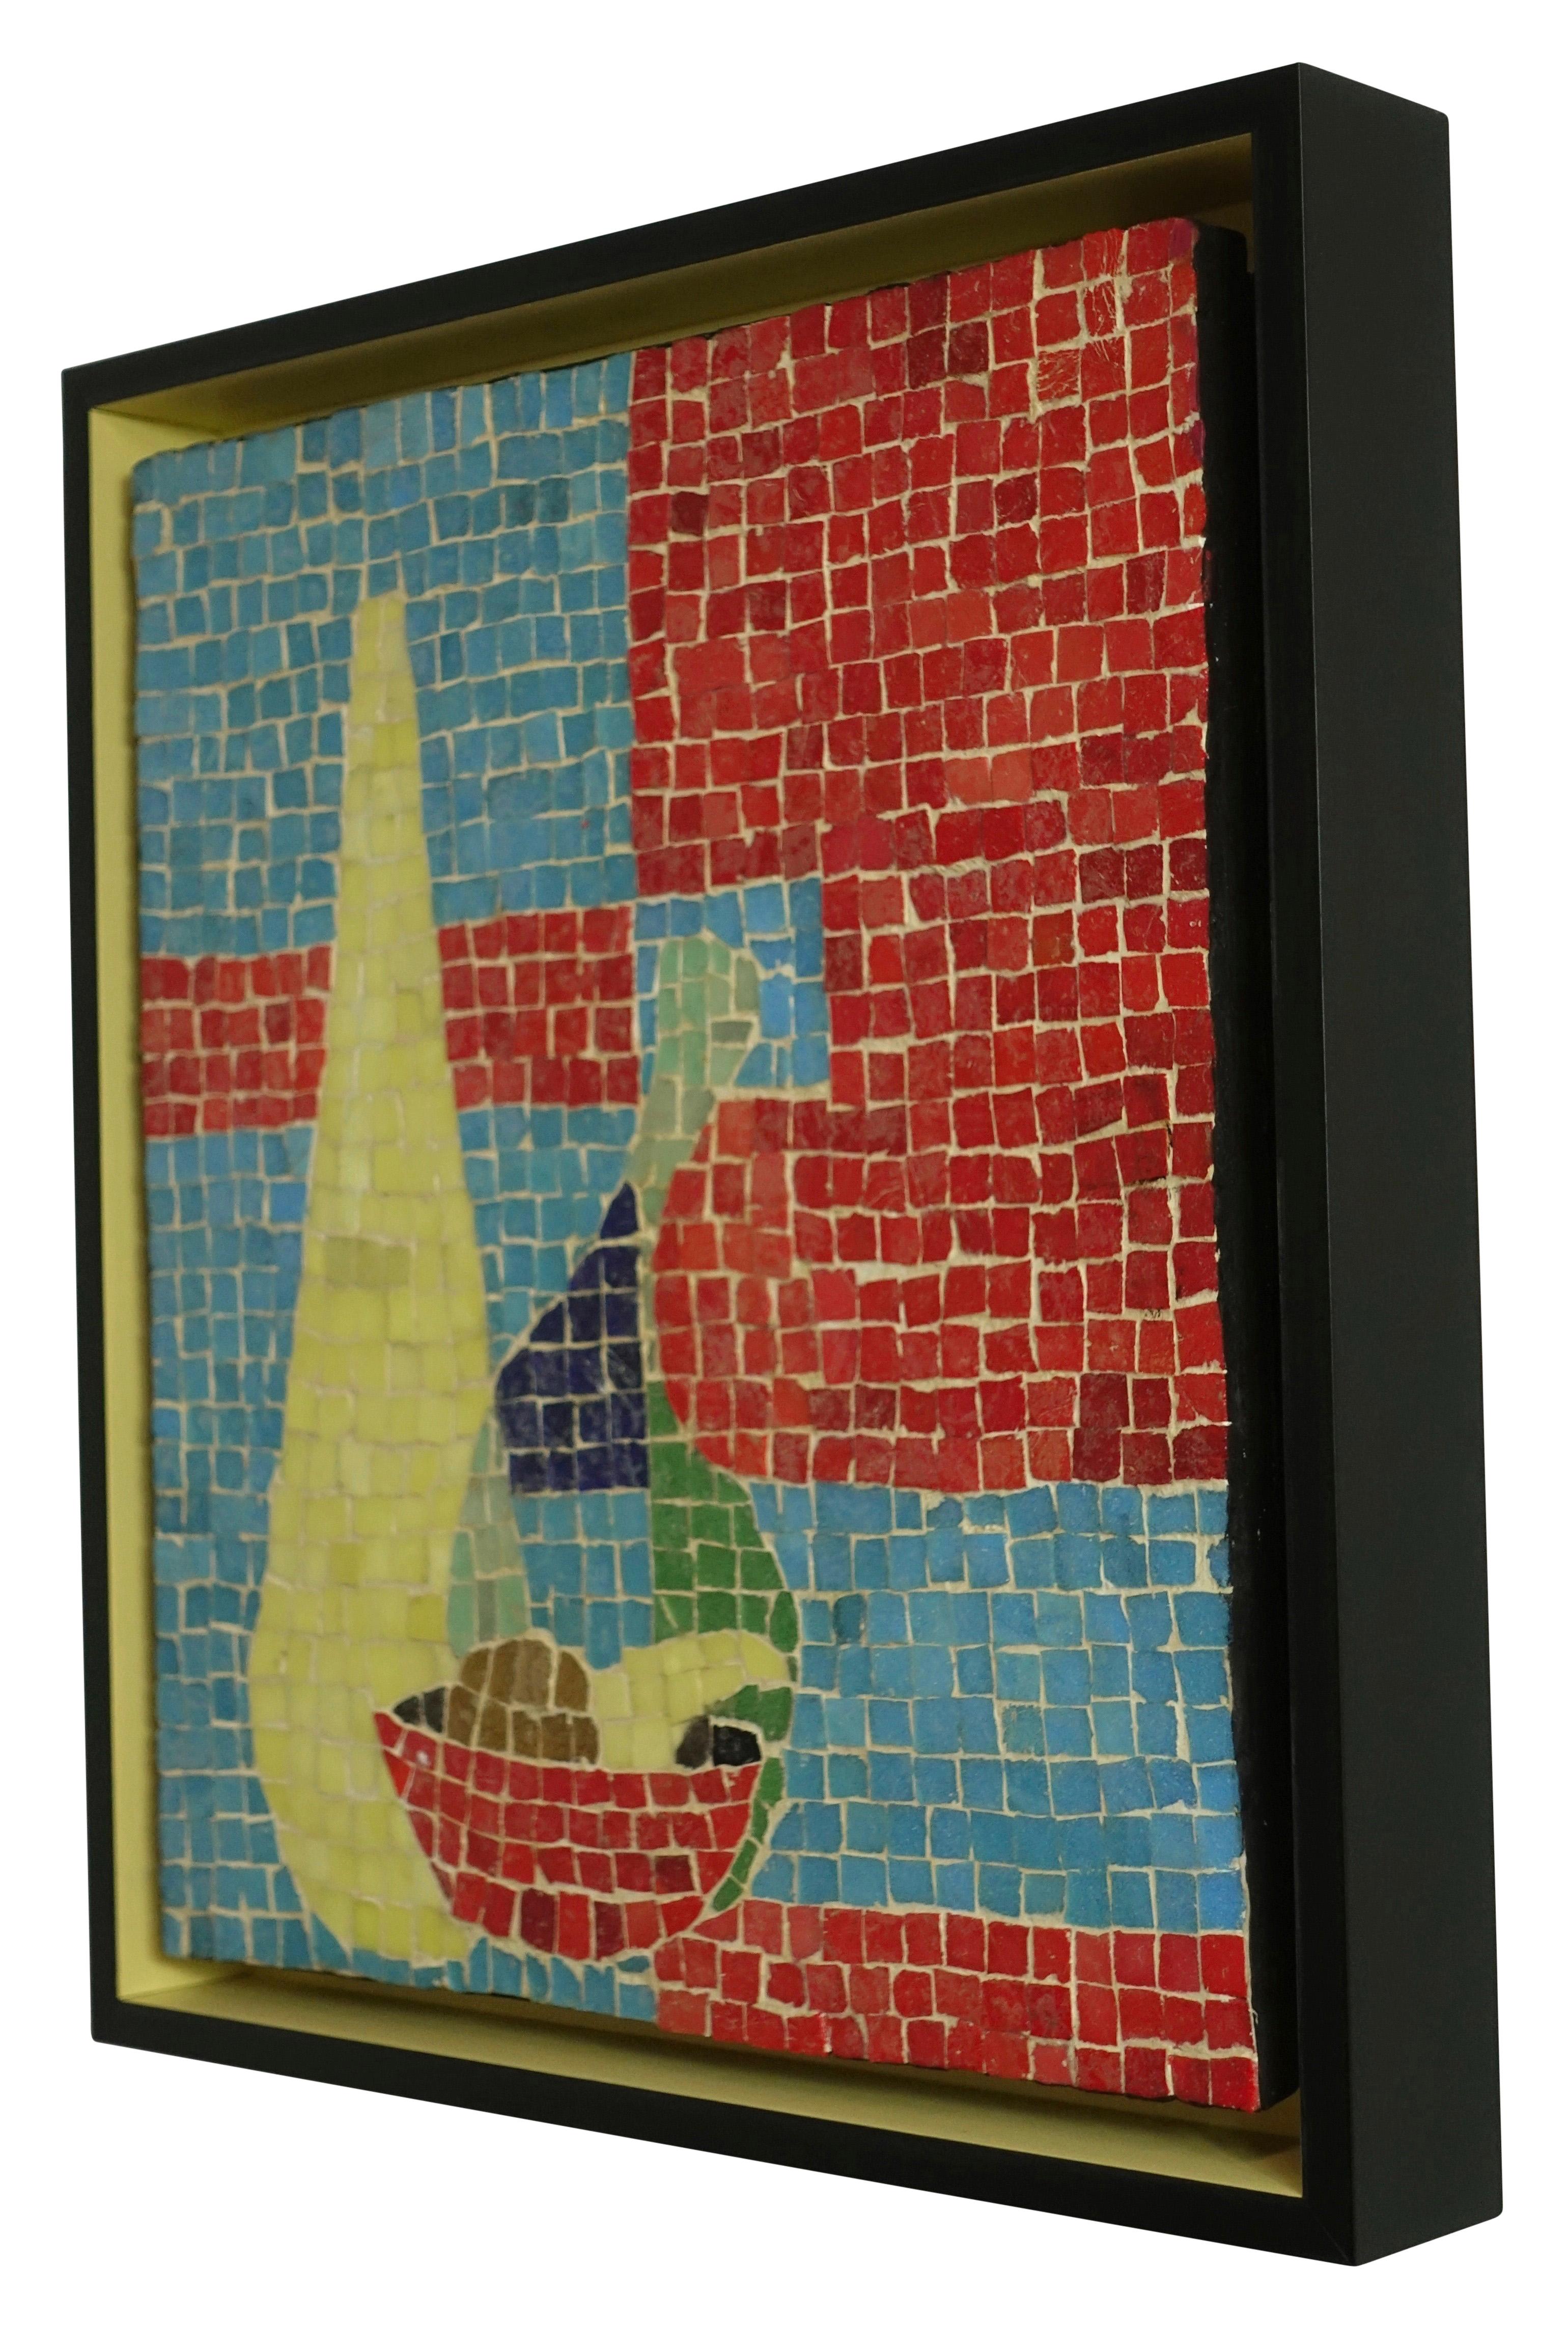 American Mosaic Tile Still Life Mounted on Panel, 1950s-1960s